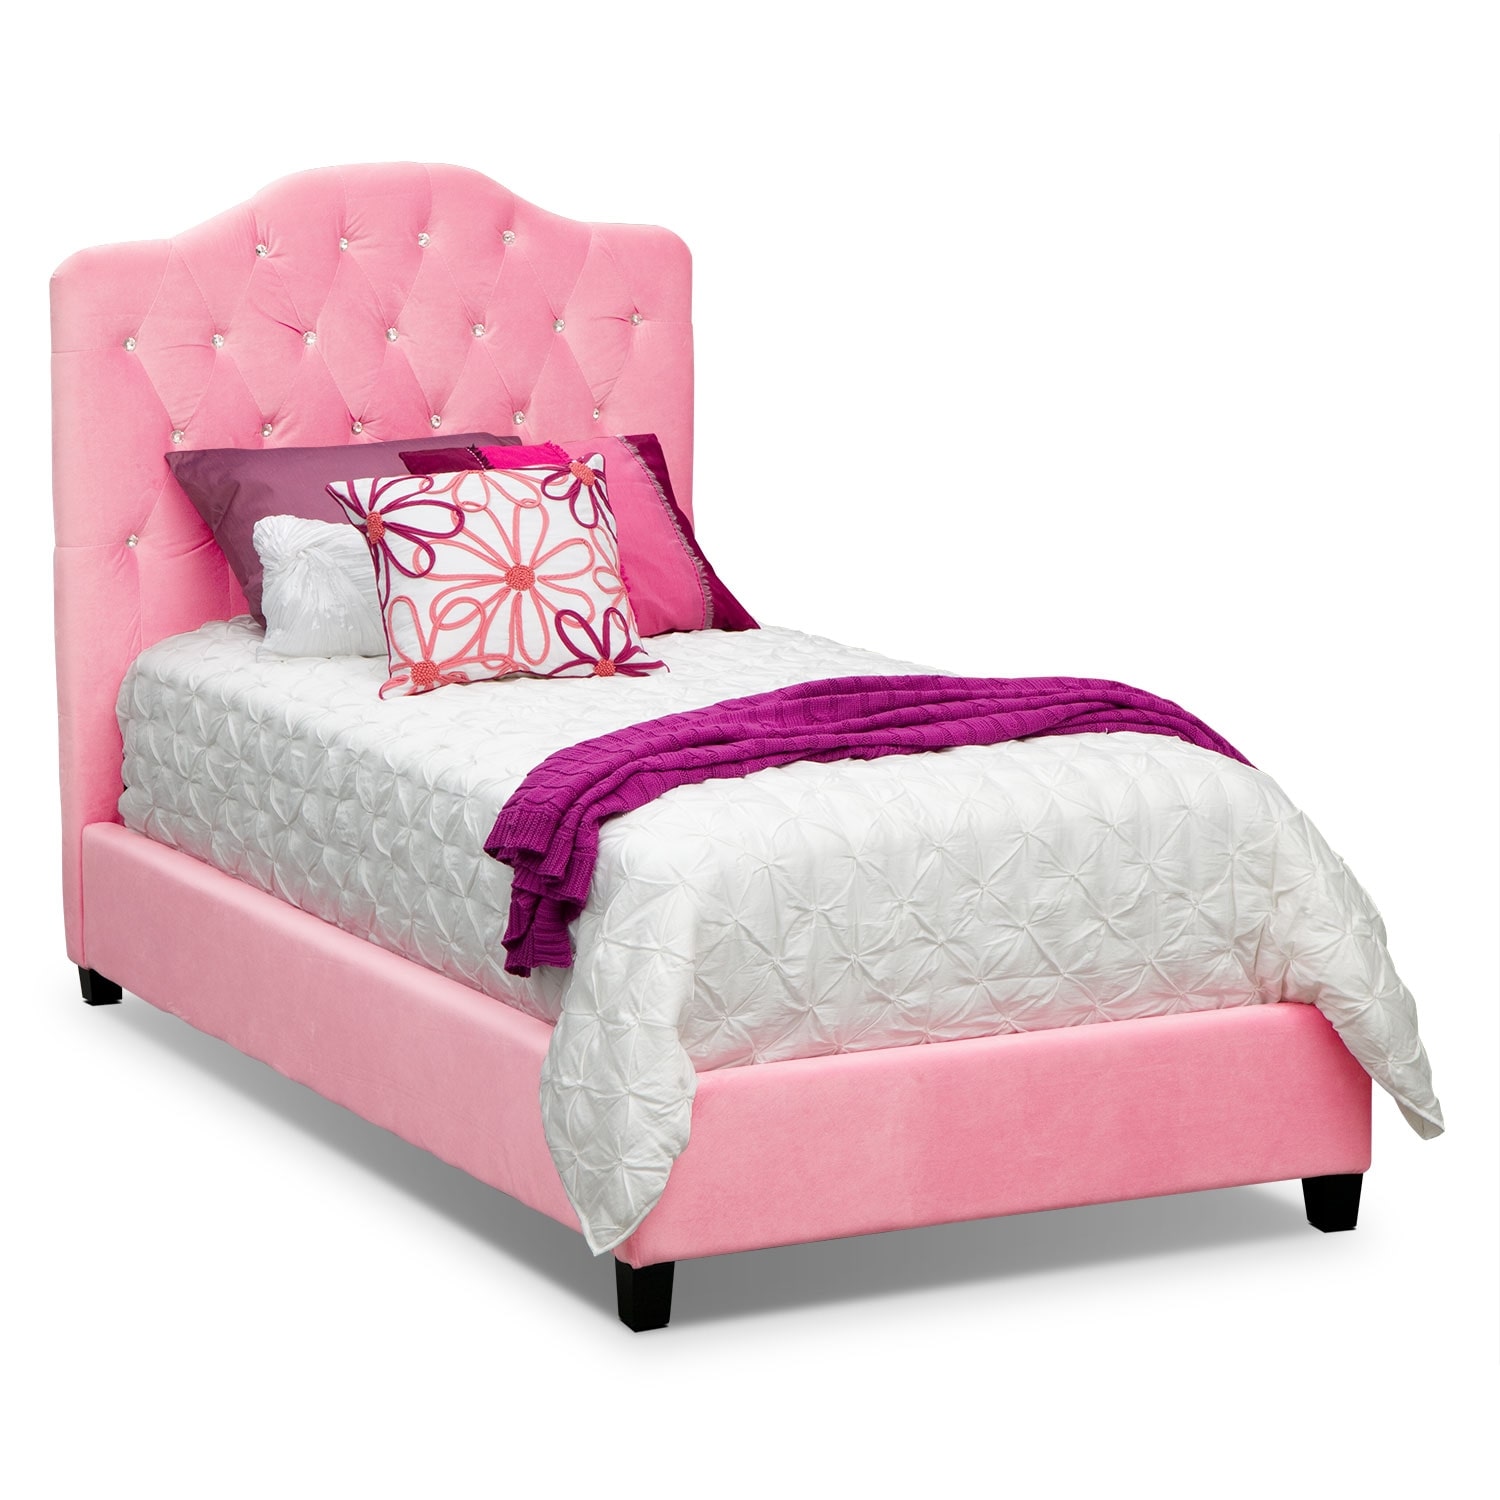 Valerie Full Bed - Pink | Value City Furniture and Mattresses